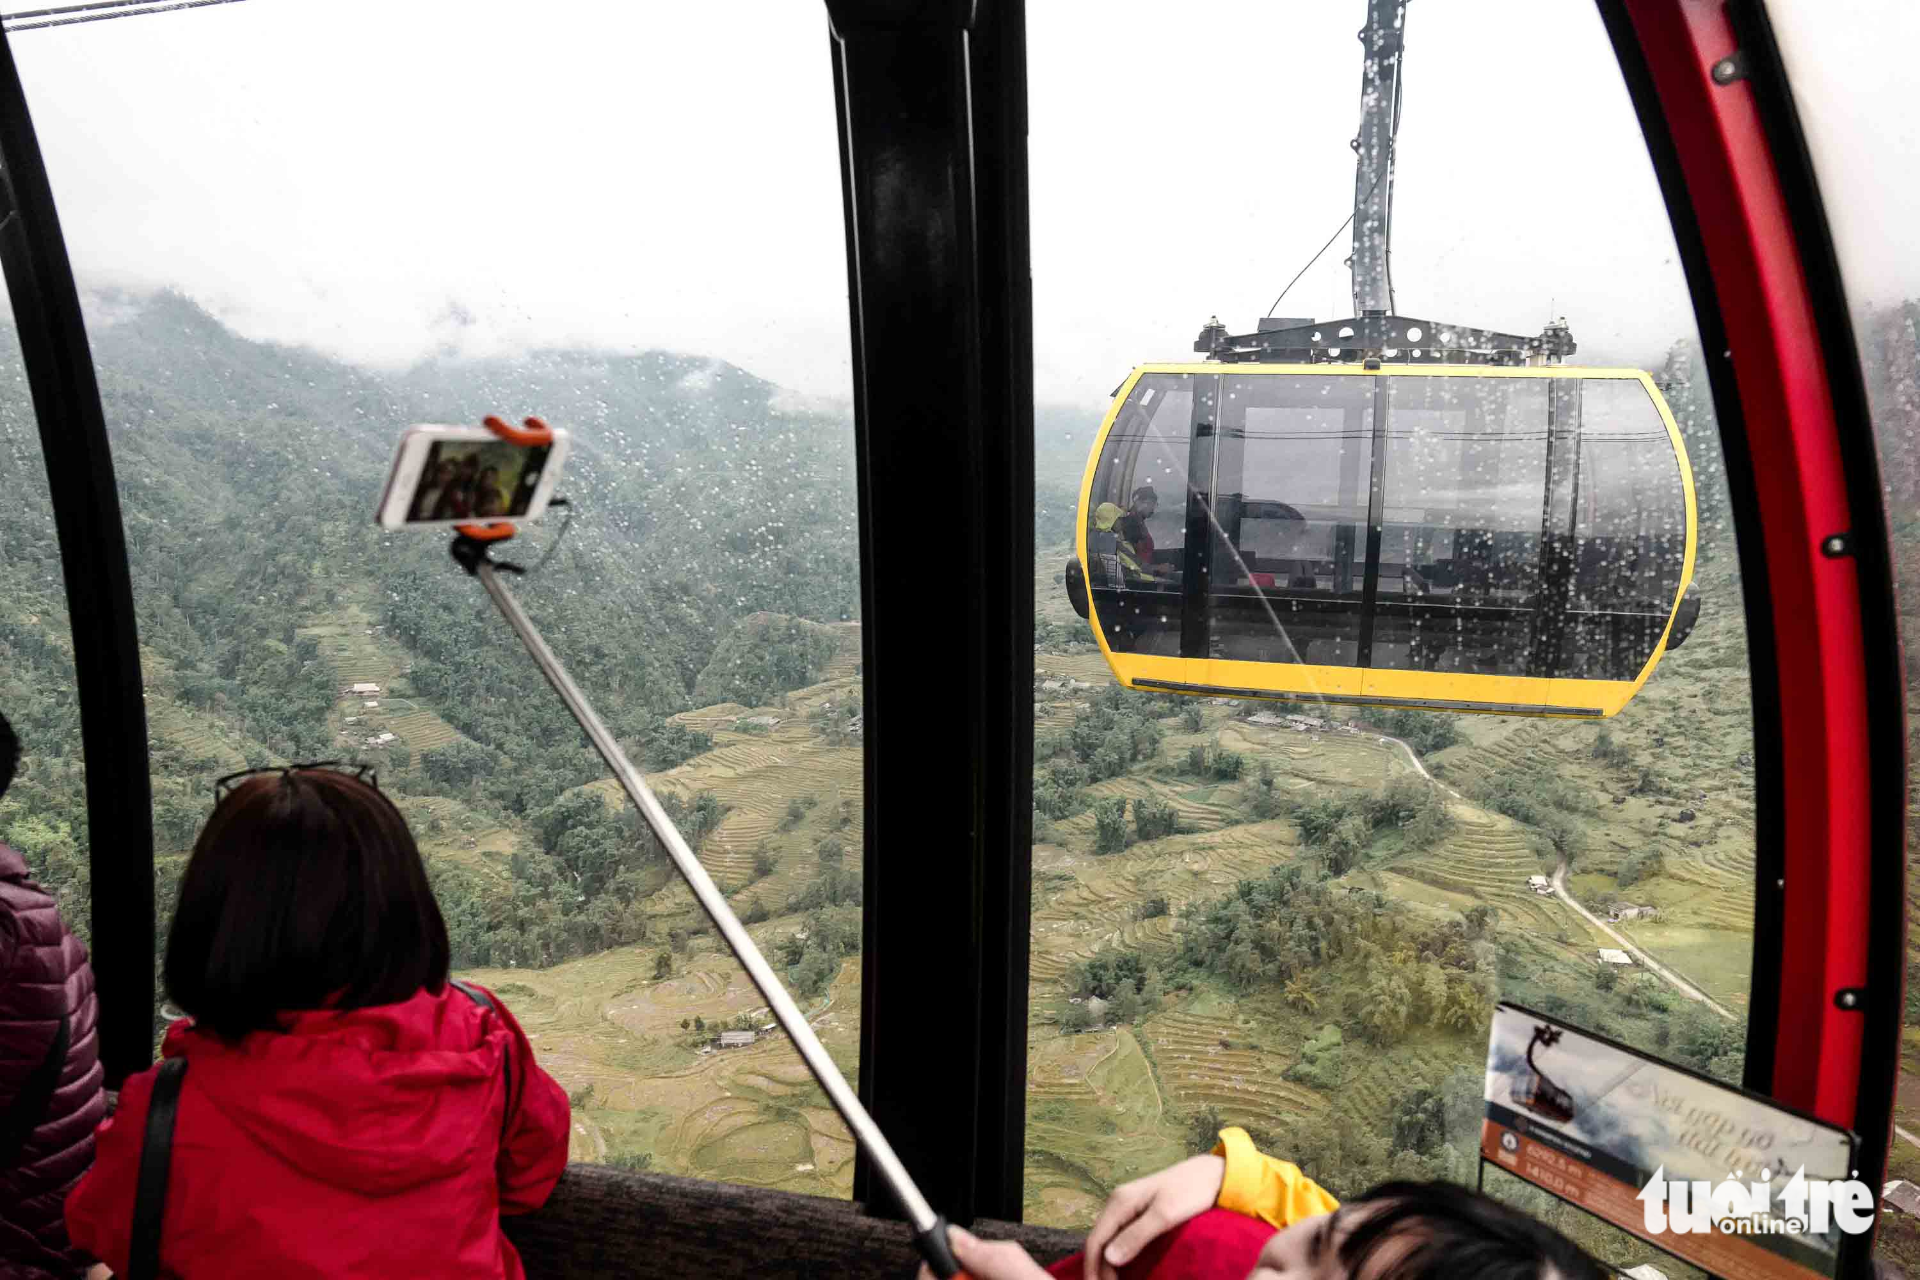 A group of visitors take selfies during their cable car journey.